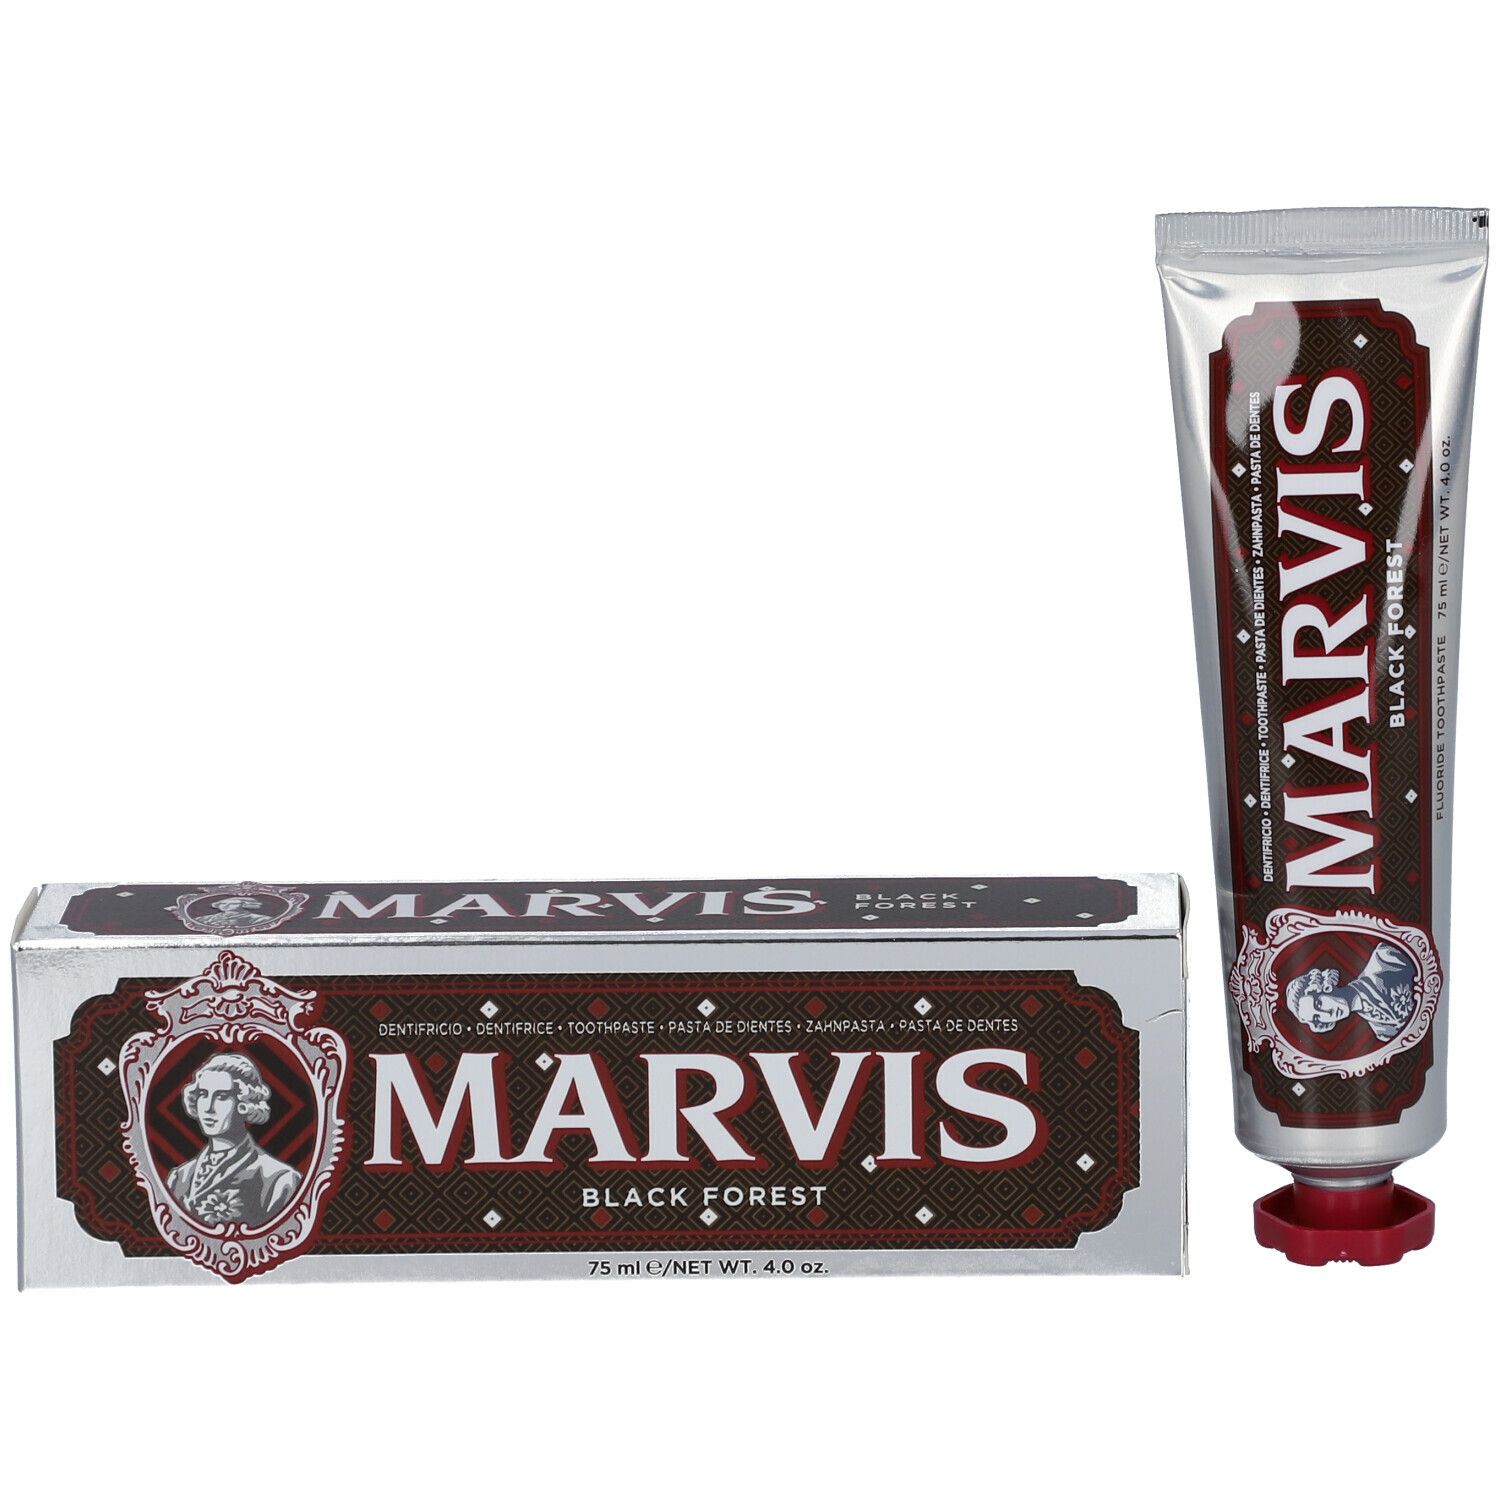 MARVIS Dentifrice Black Forest